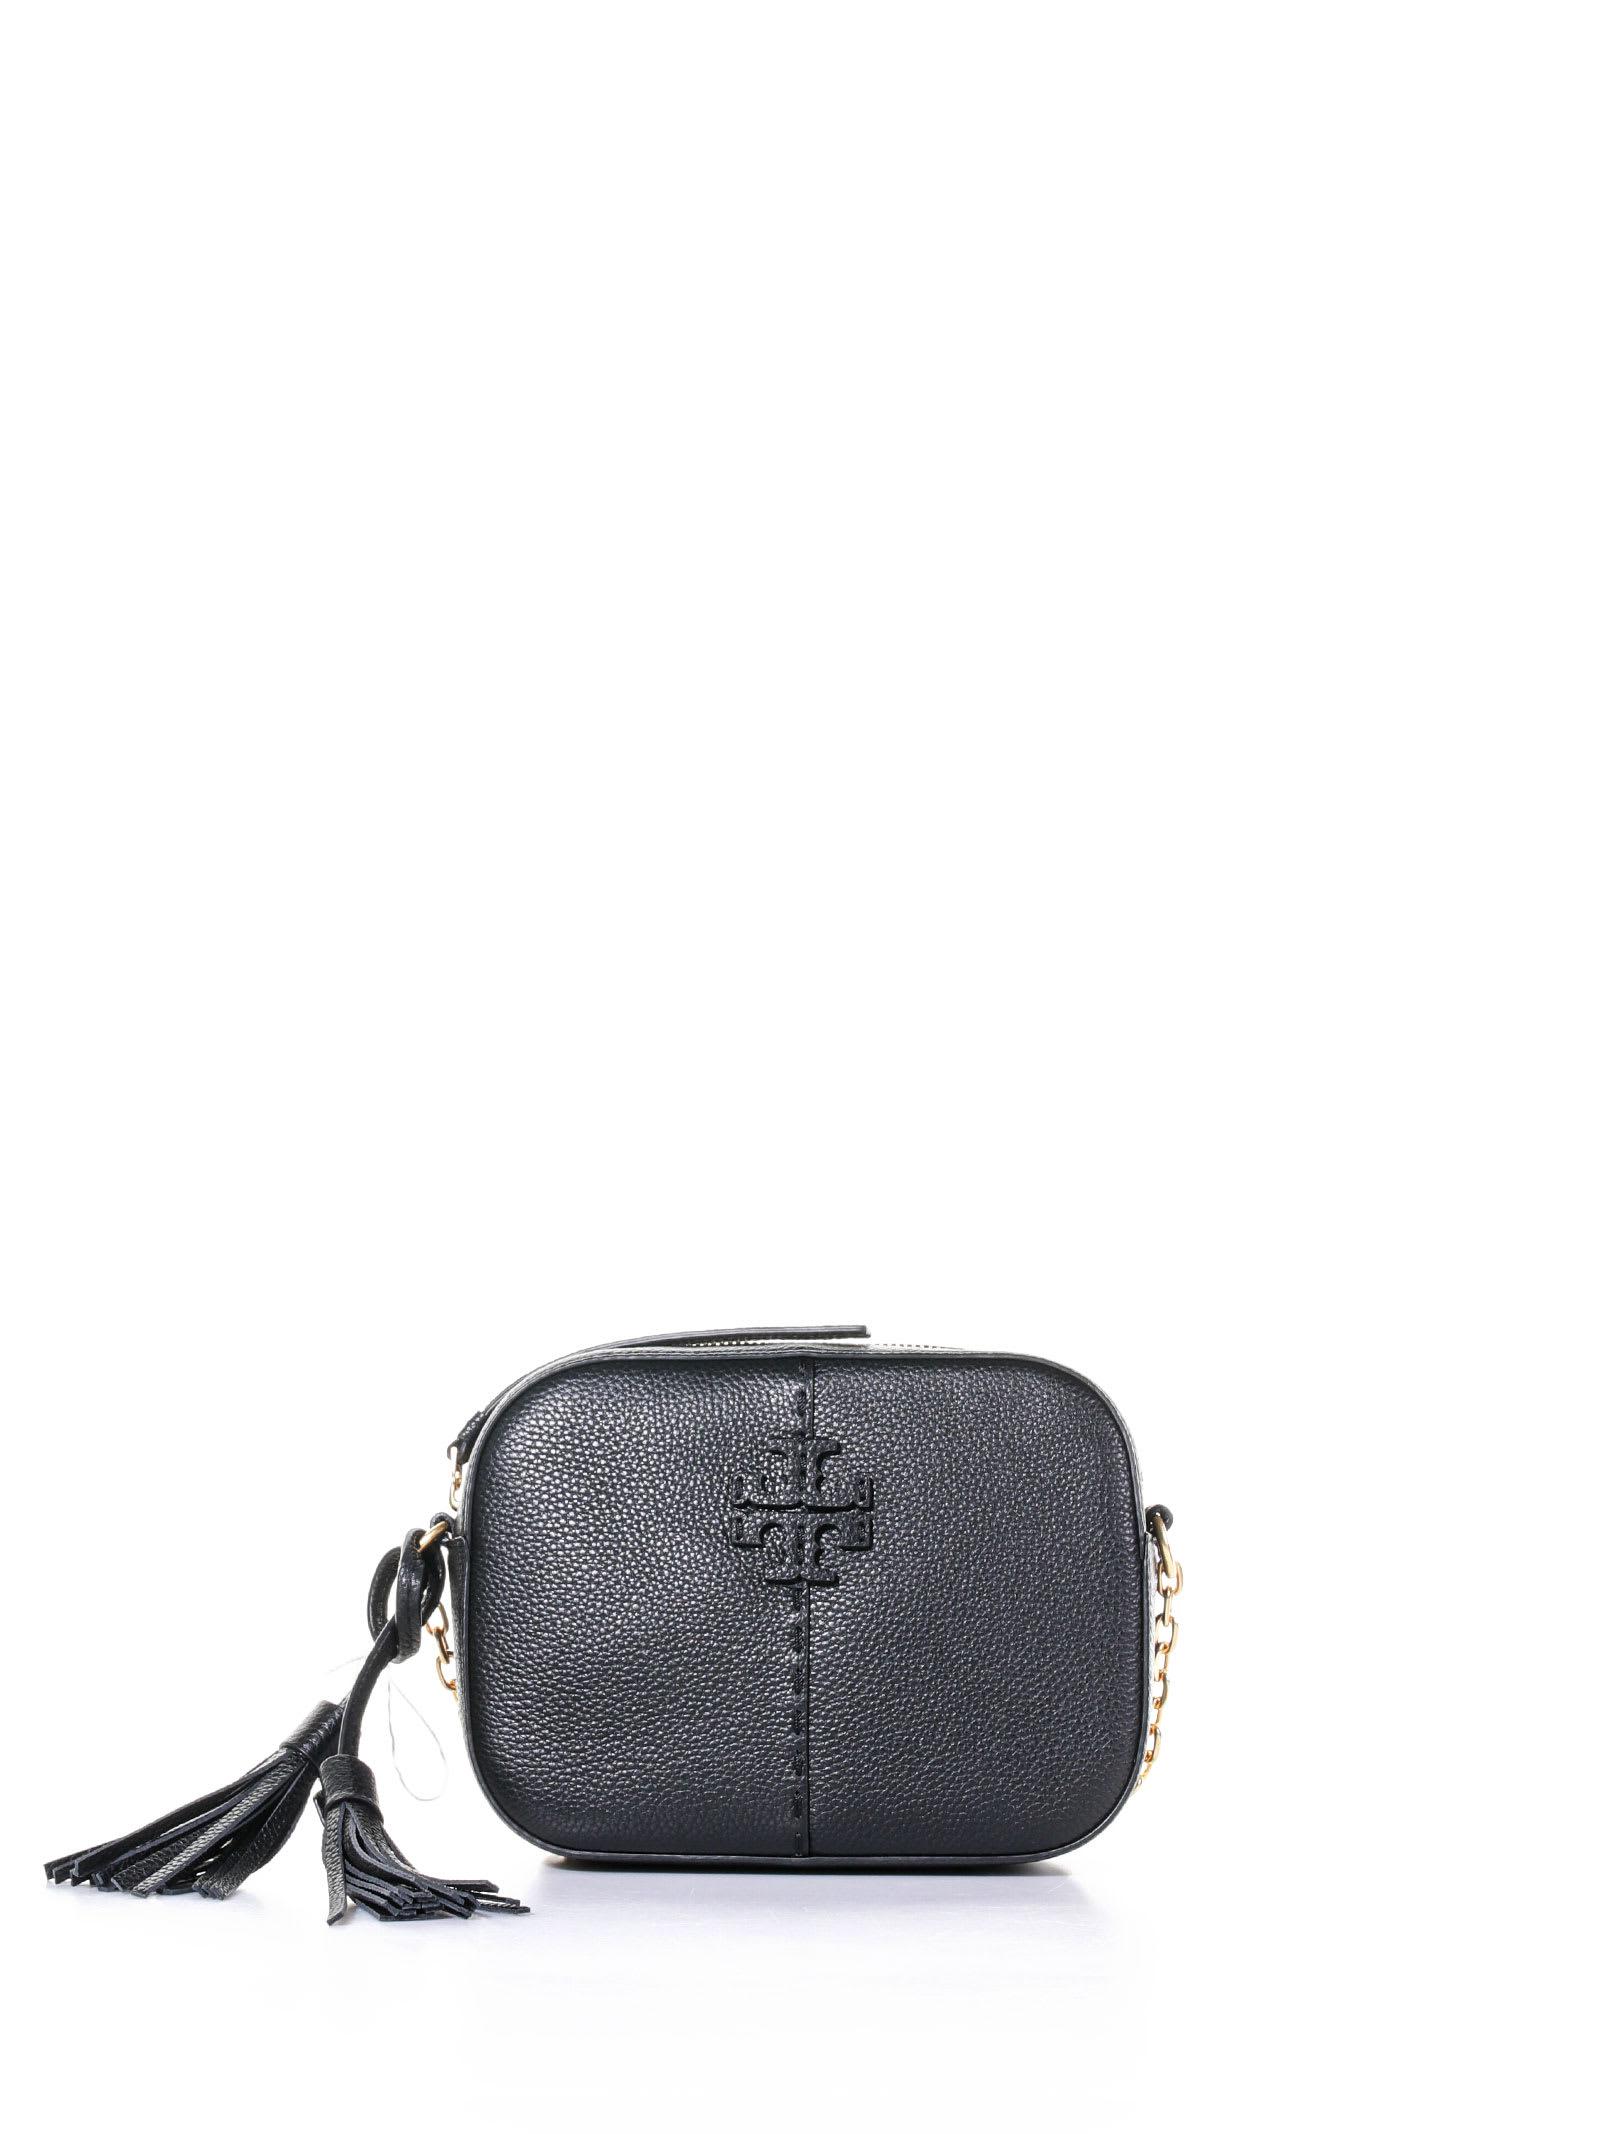 Tory Burch Camera Bag Mcgraw With Shoulder Strap in Black | Lyst